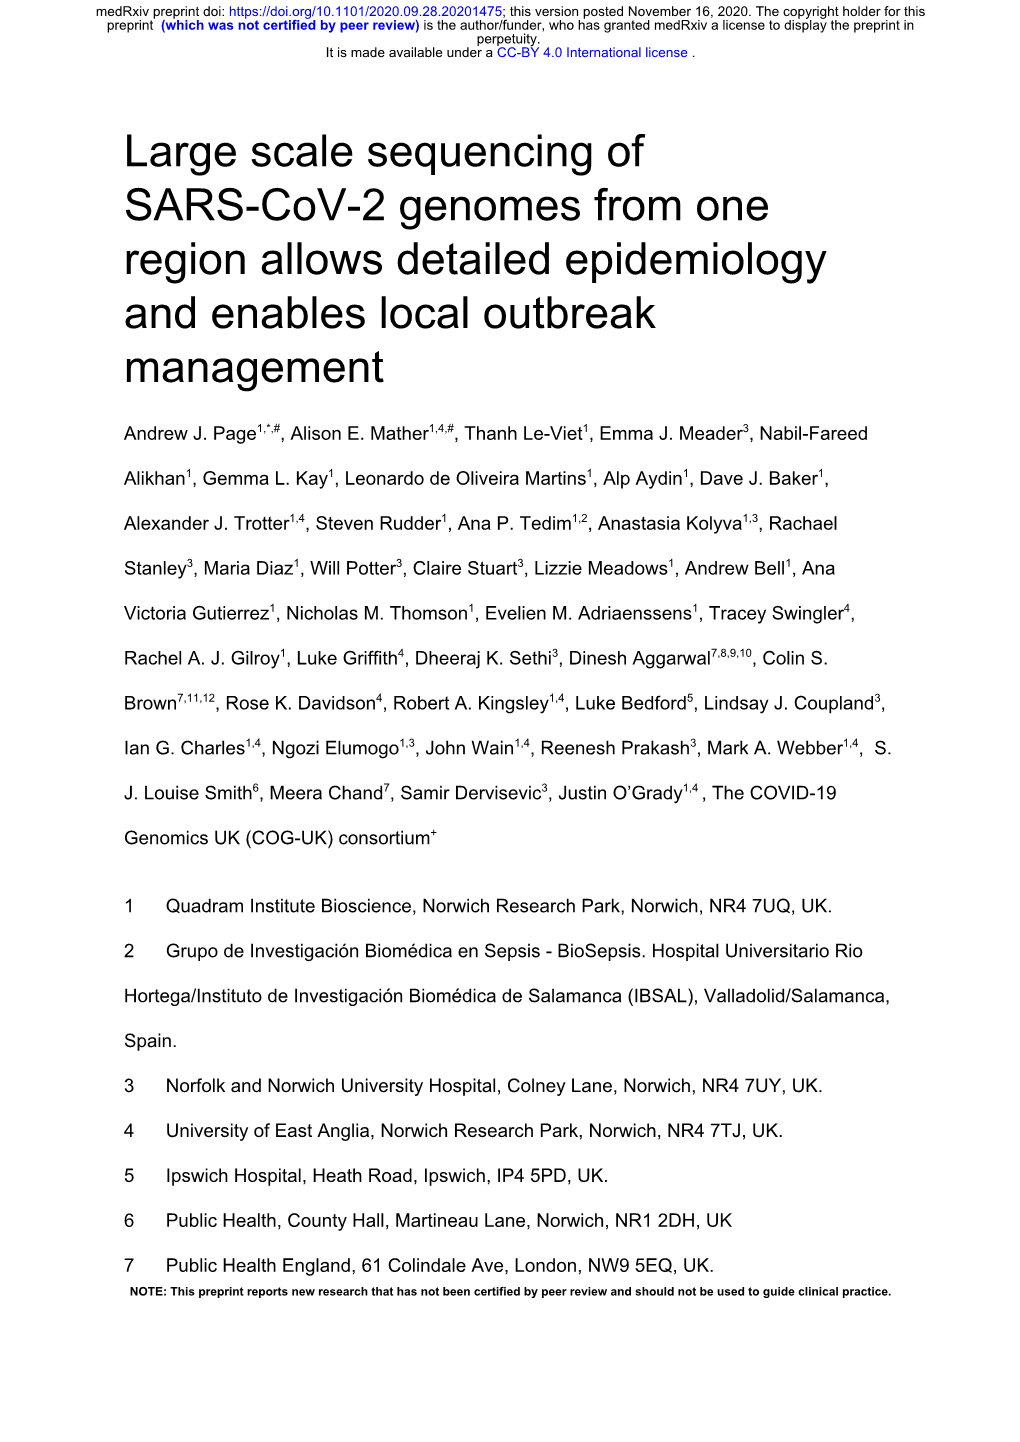 Large Scale Sequencing of SARS-Cov-2 Genomes from One Region Allows Detailed Epidemiology and Enables Local Outbreak Management